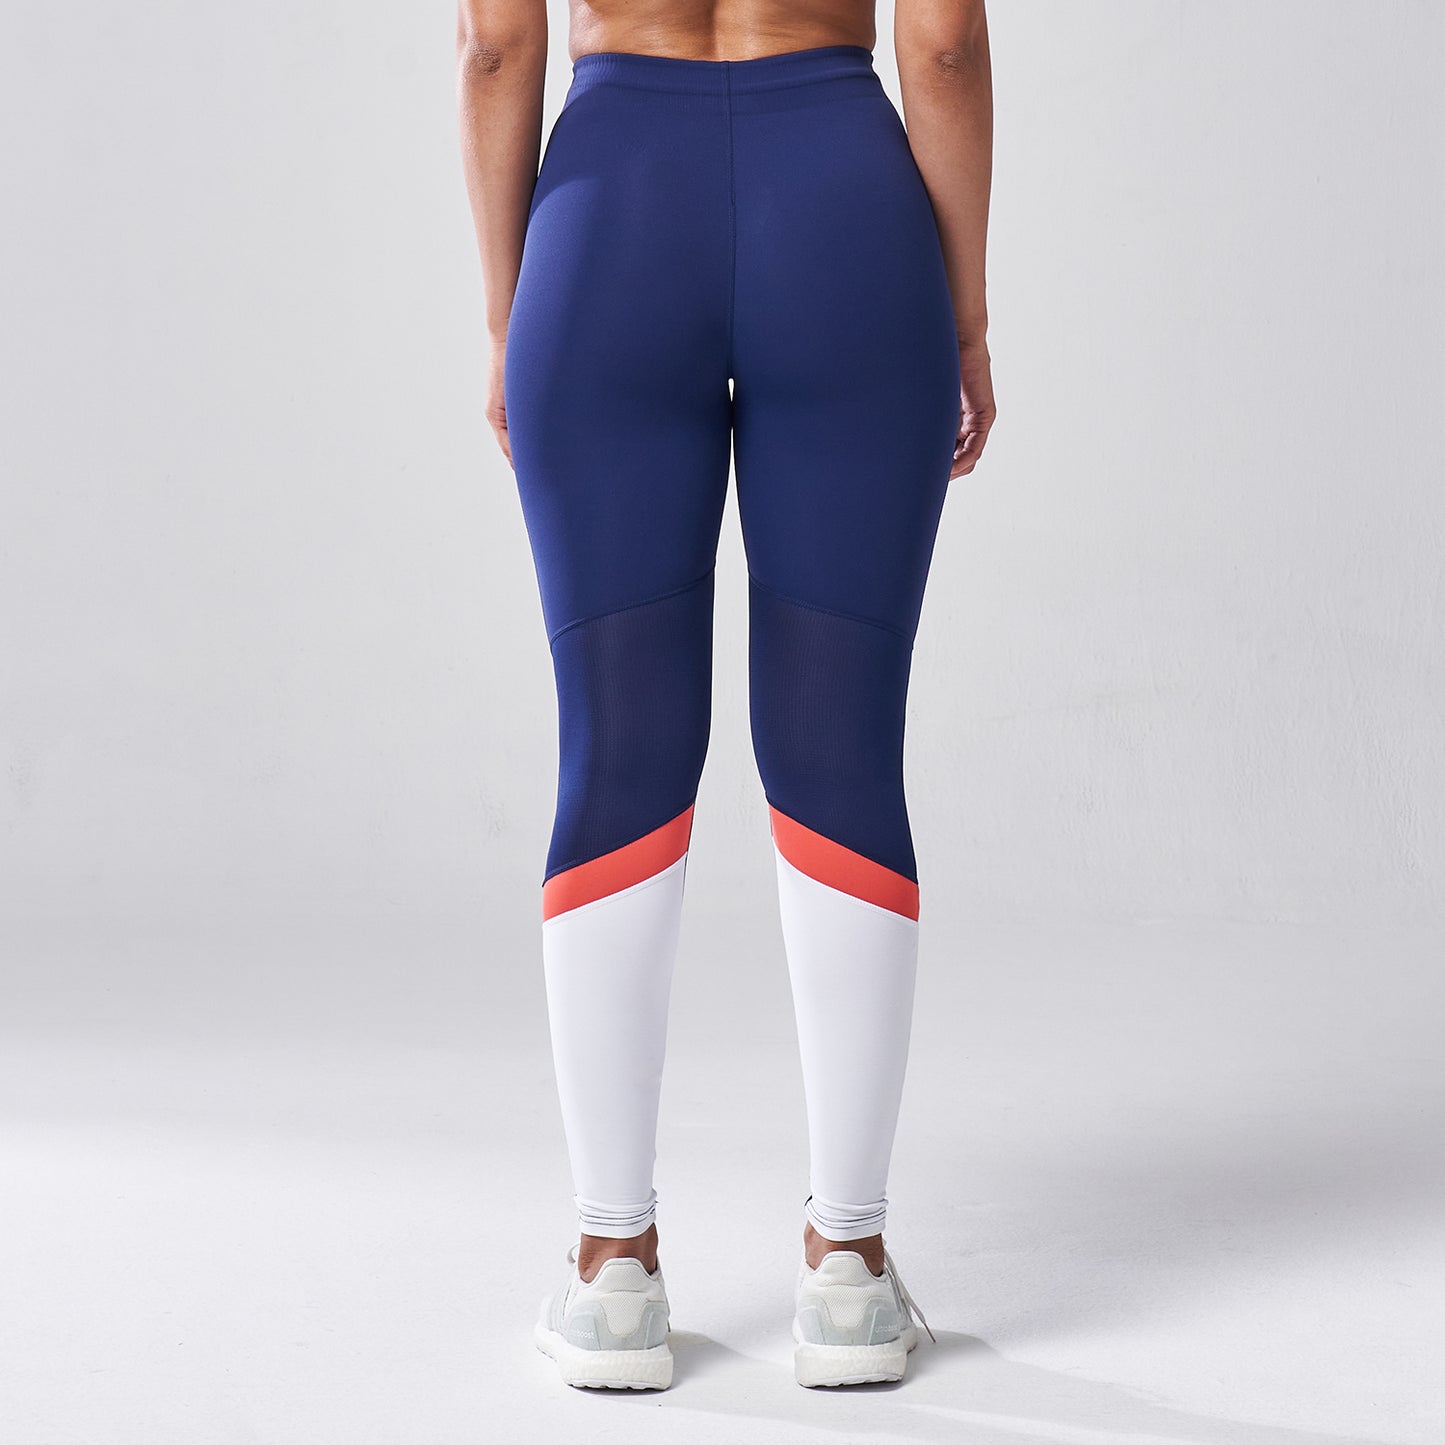 squatwolf-workout-clothes-lab-360-act-leggings-blue-gym-leggings-for-women